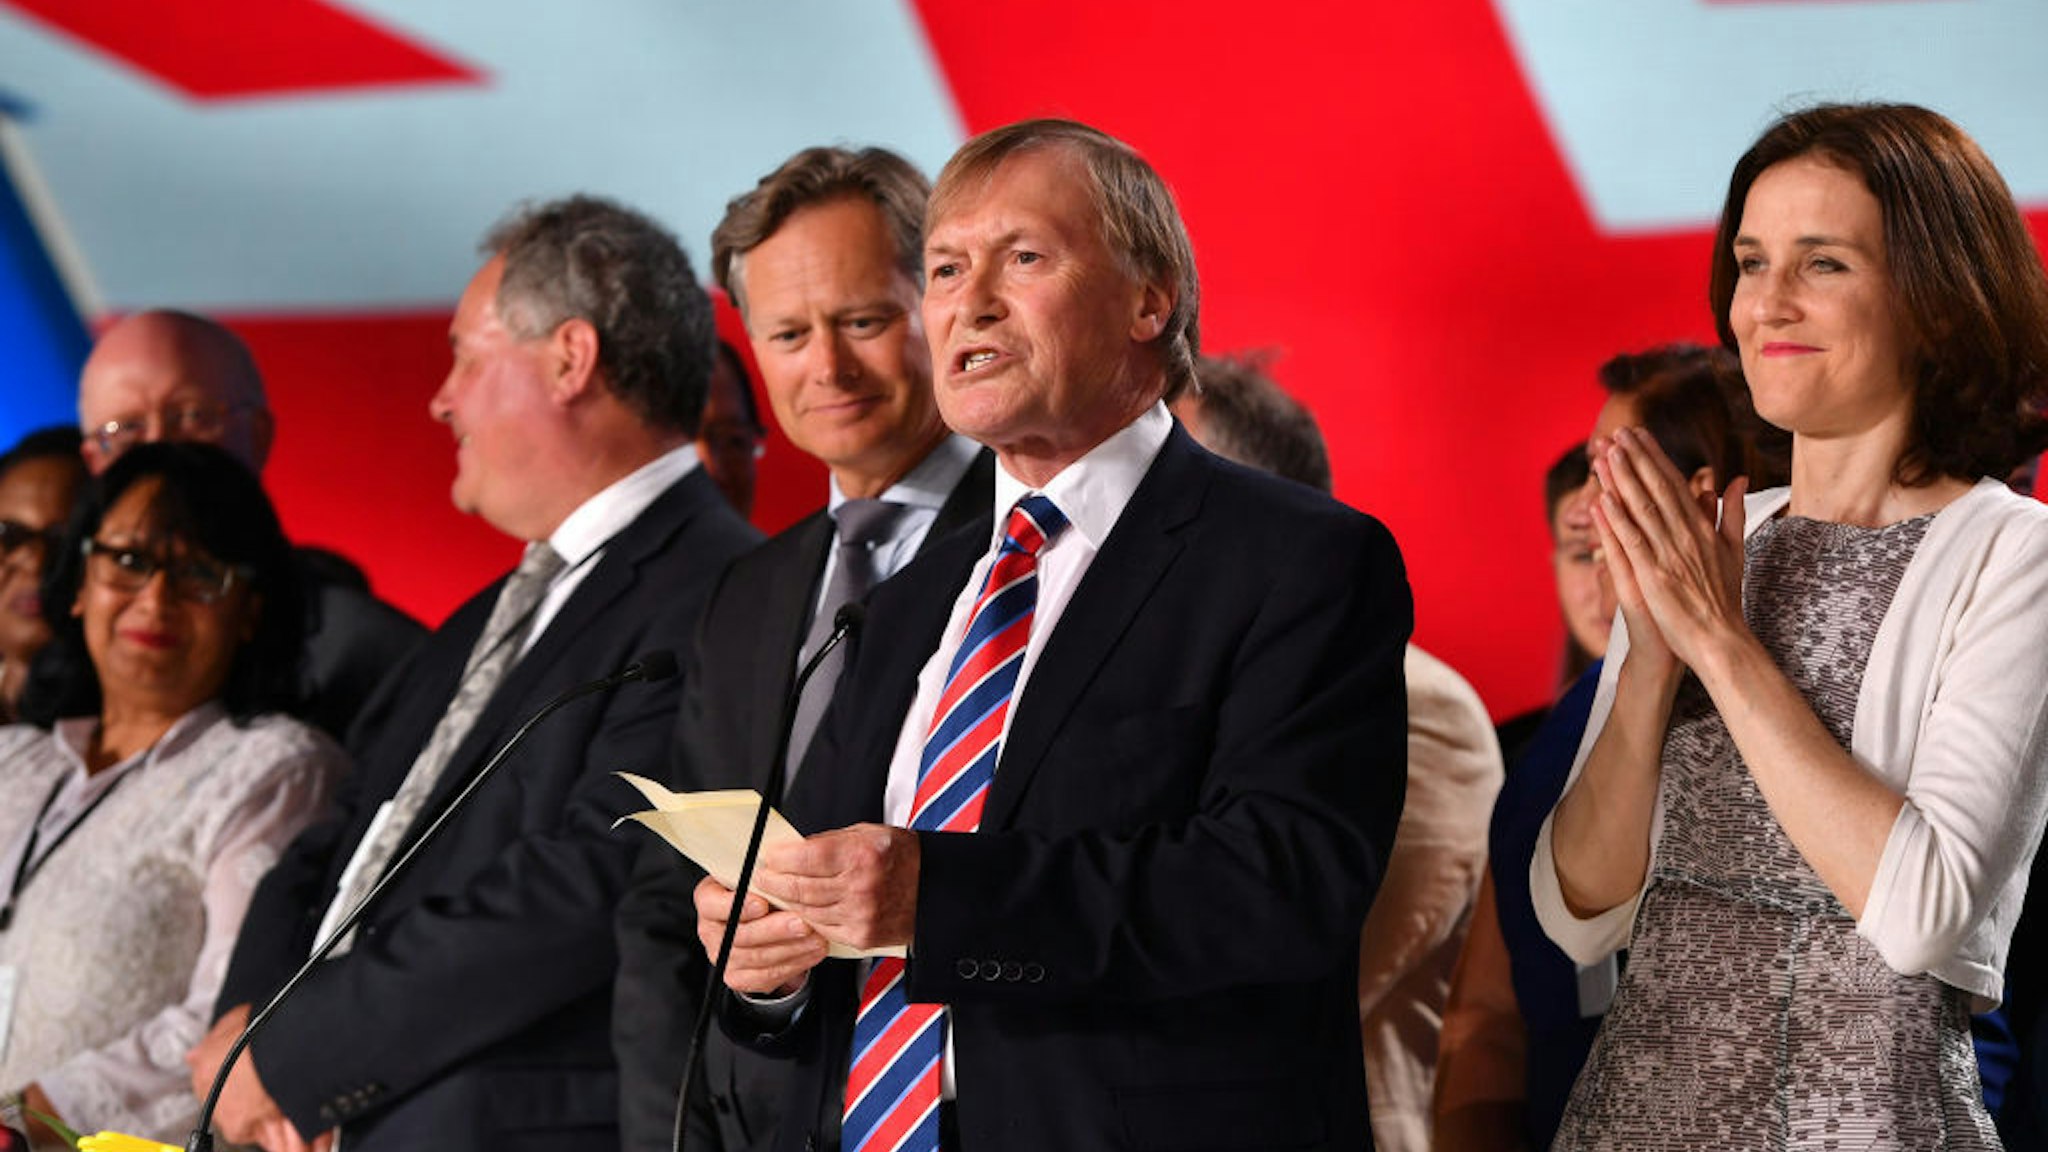 PARIS, FRANCE - JUNE 30: Sir David Amess speaks as the British delegation appear on stage during the Conference In Support Of Freedom and Democracy In Iran on June 30, 2018 in Paris, France. The speakers declared their support for the Iranian peoples uprising and the democratic alternative, the National Council of Resistance of Iran and called on the international community to adopt a firm policy against the mullahs regime and stand by the arisen people of Iran. (Photo by Anthony Devlin/Getty Images)